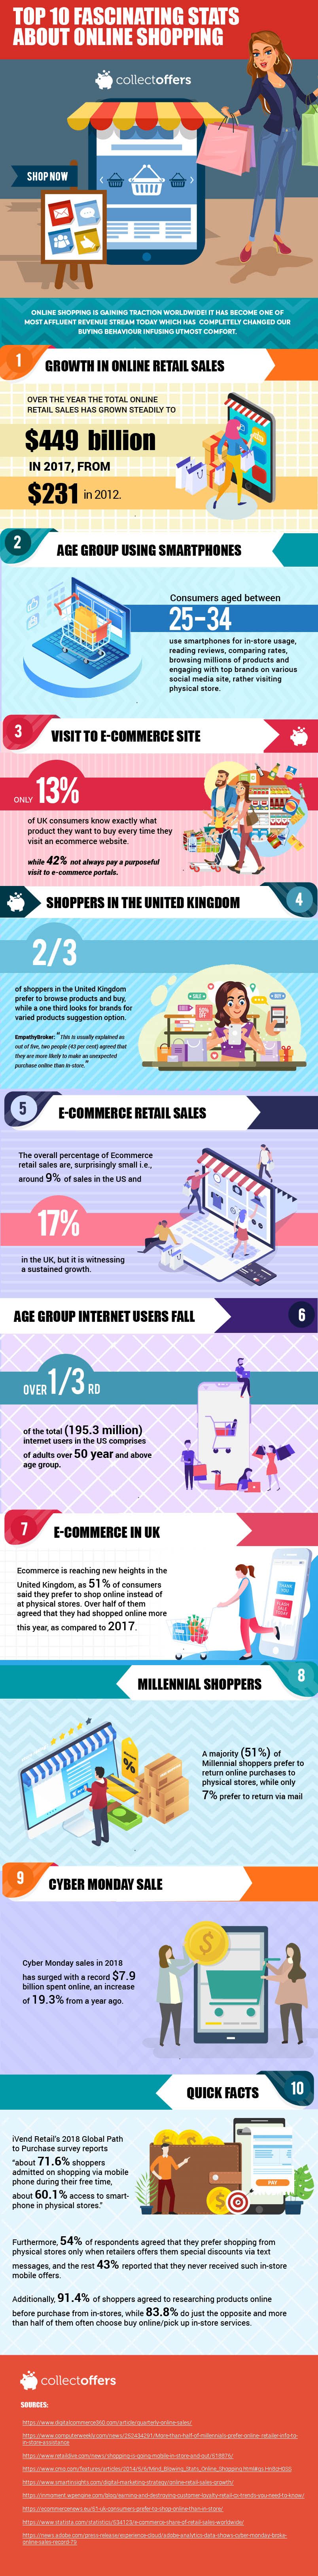 Top 10 Fascinating Stats About Online Shopping #infographic